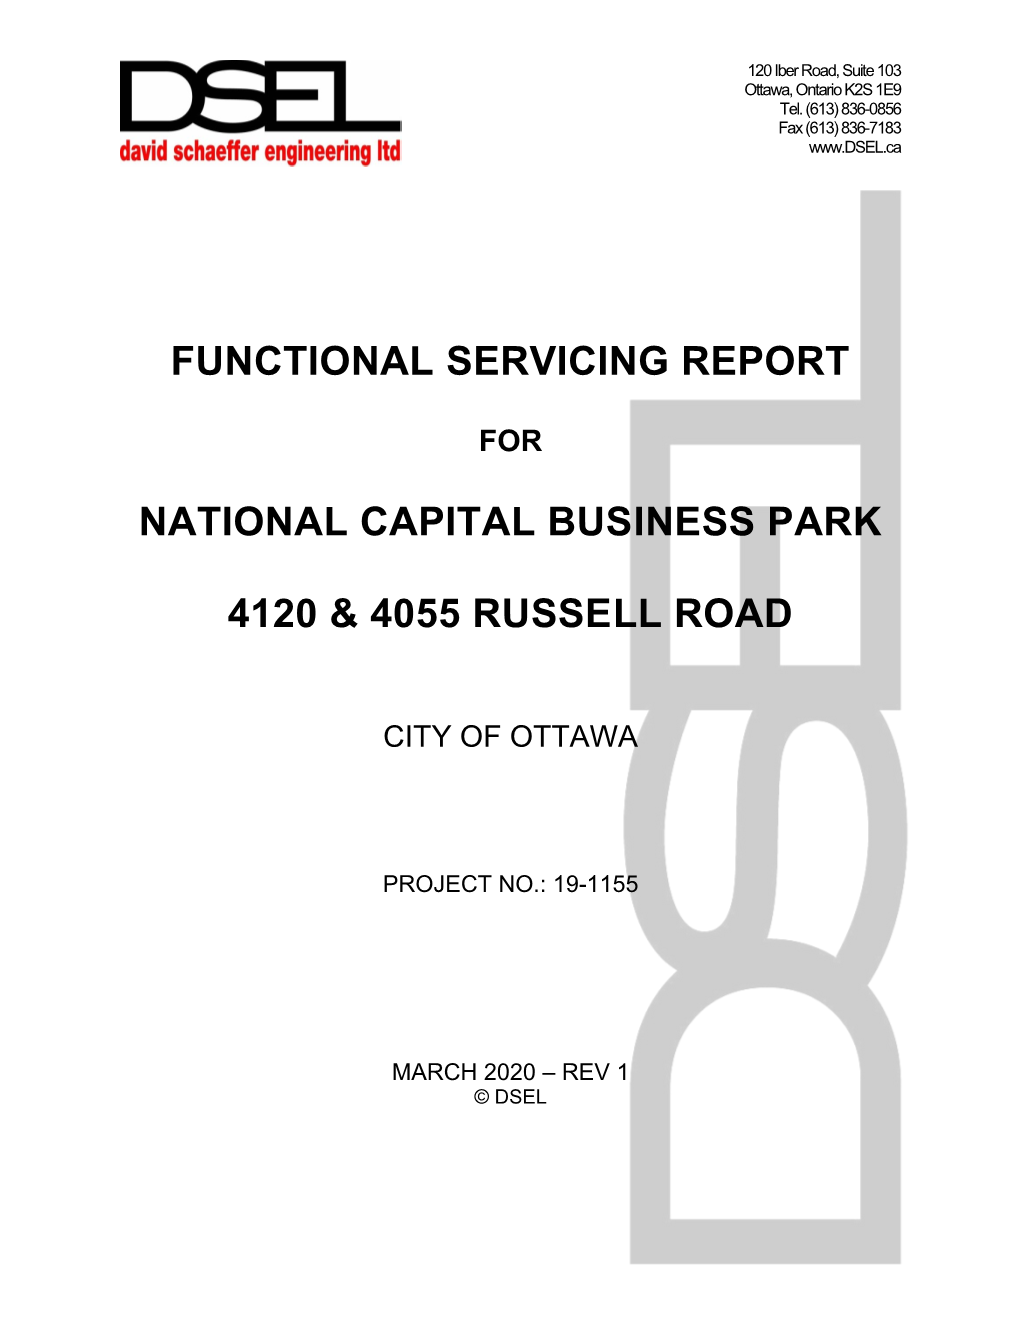 Functional Servicing Report National Capital Business Park March 2020 – Rev 1 4120 & 4055 Russell Road